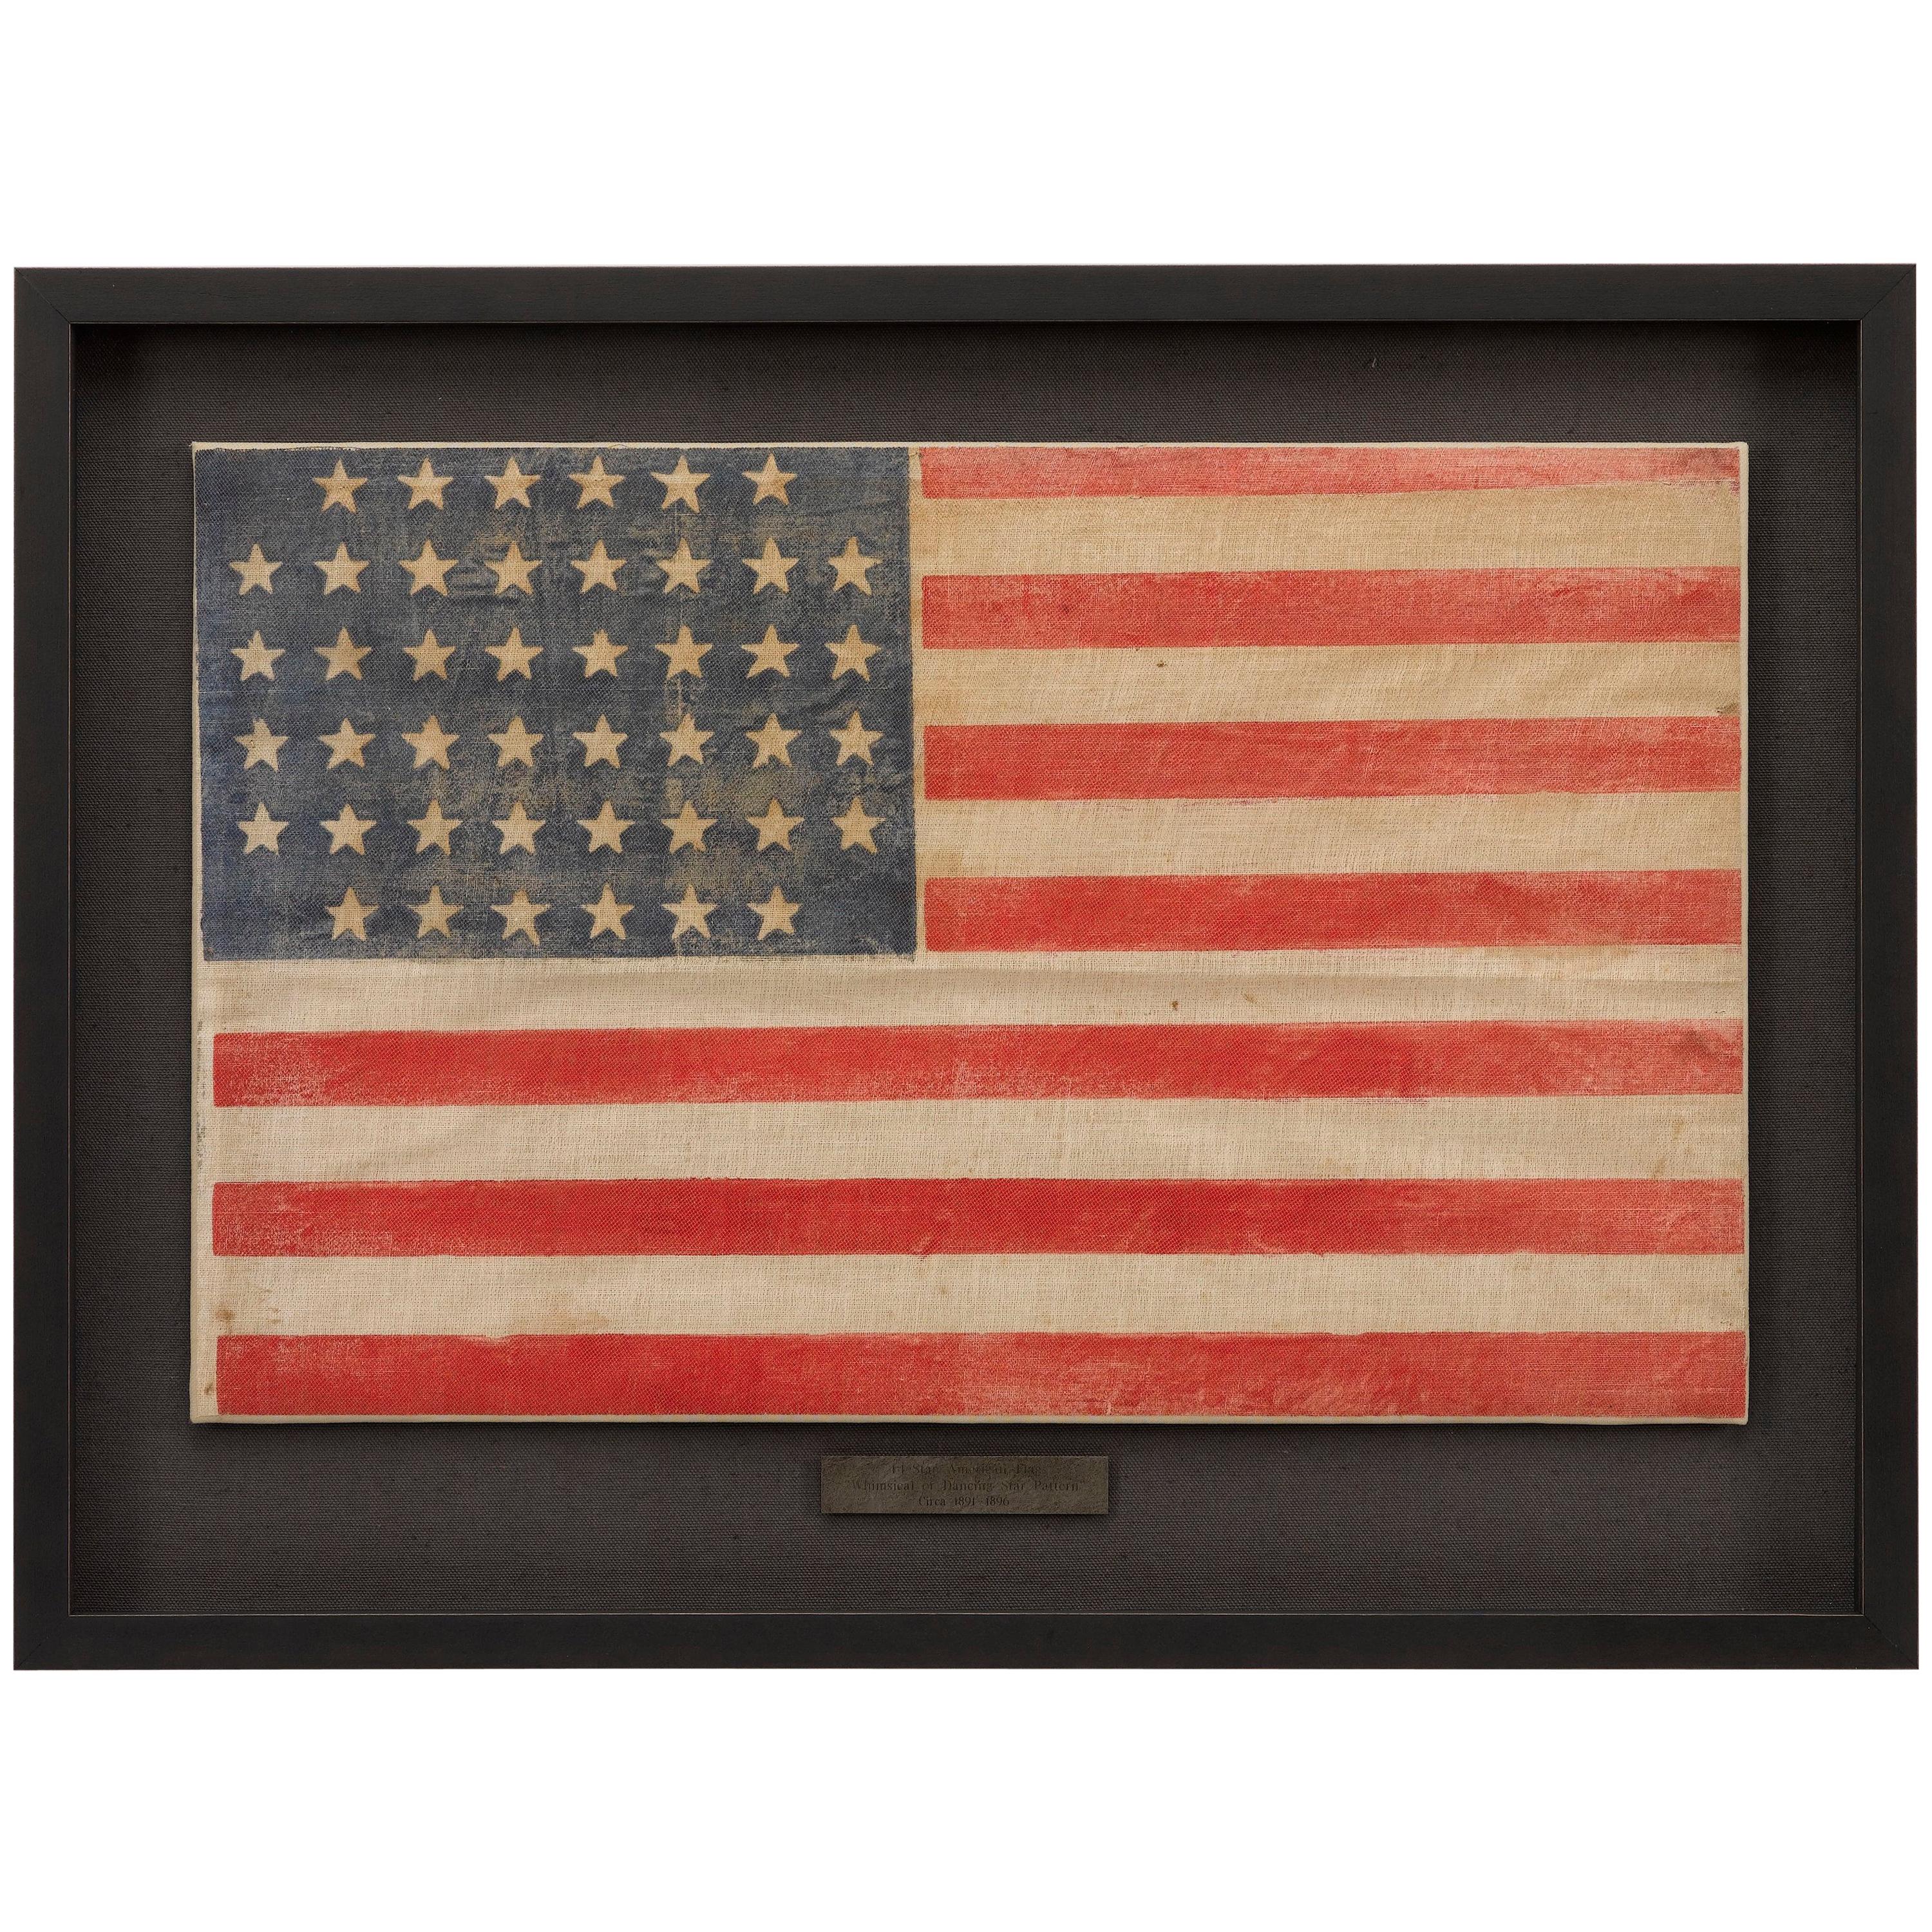 44-Star American Flag, Printed in Drum Star Configuration